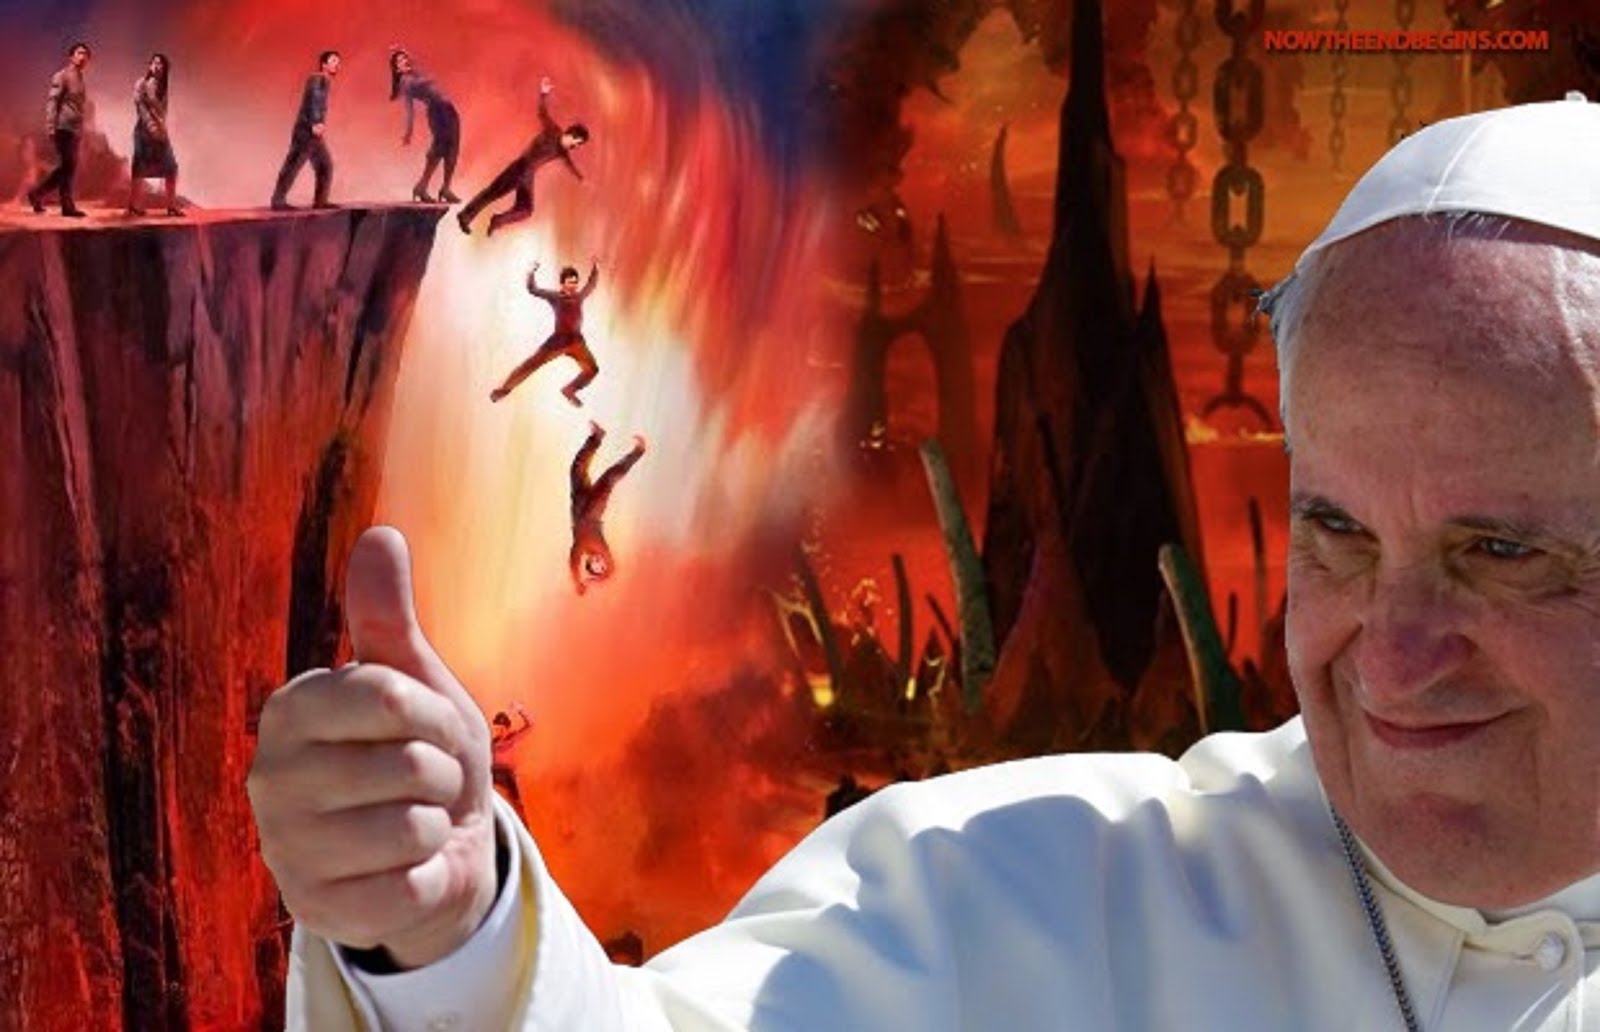 POPE FRANCIS TAKES THE WORLD TO HELL